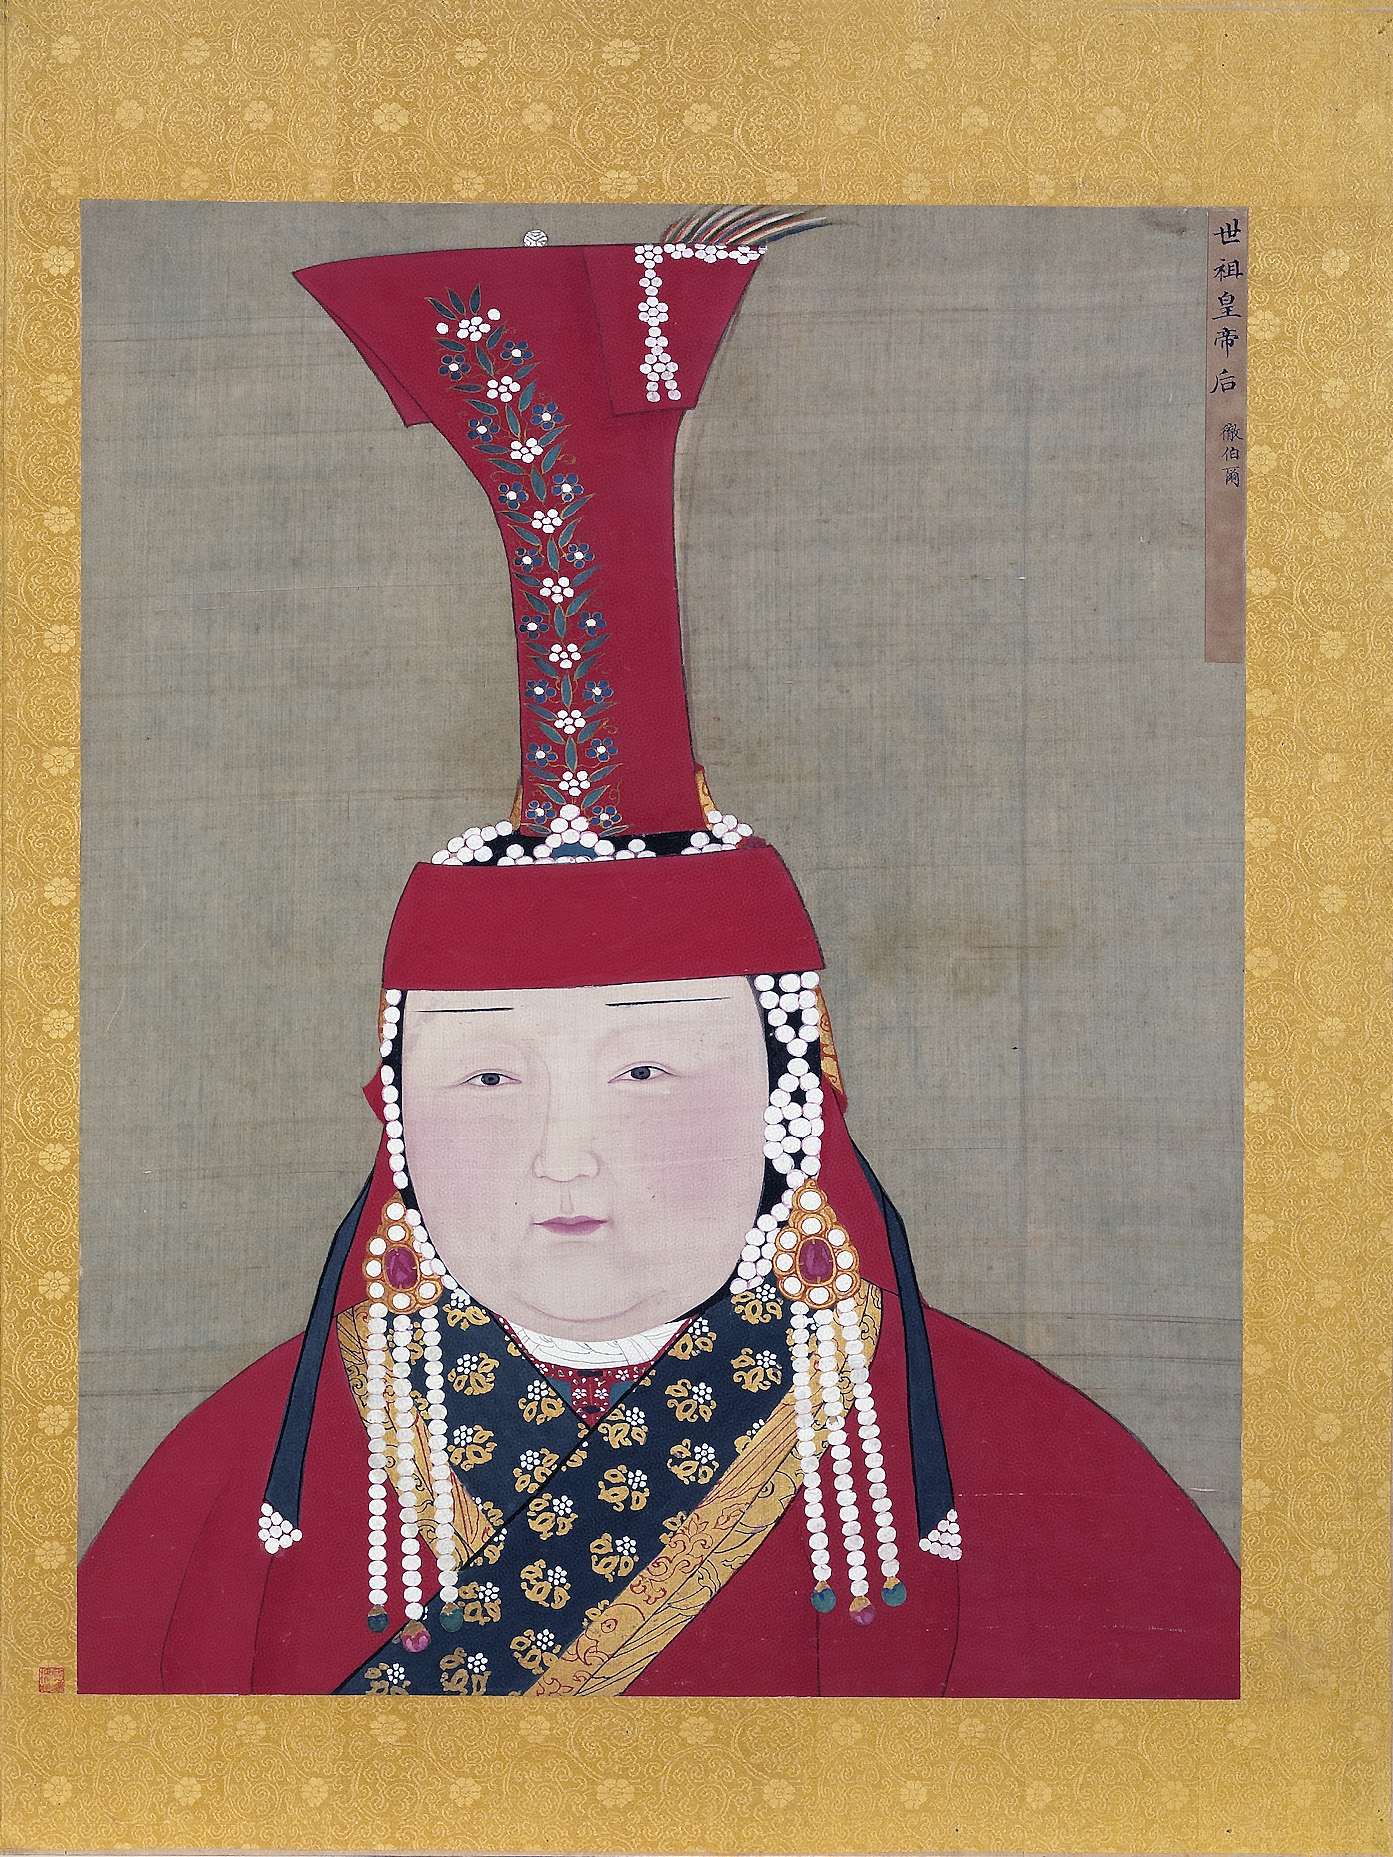 Anige (1245-1306), Portrait of Chabi, 1294. Album leaf, ink and colors on silk. Height: 61.5 cm; width: 48 cm. Image source: National Palace Museum, Taipei.